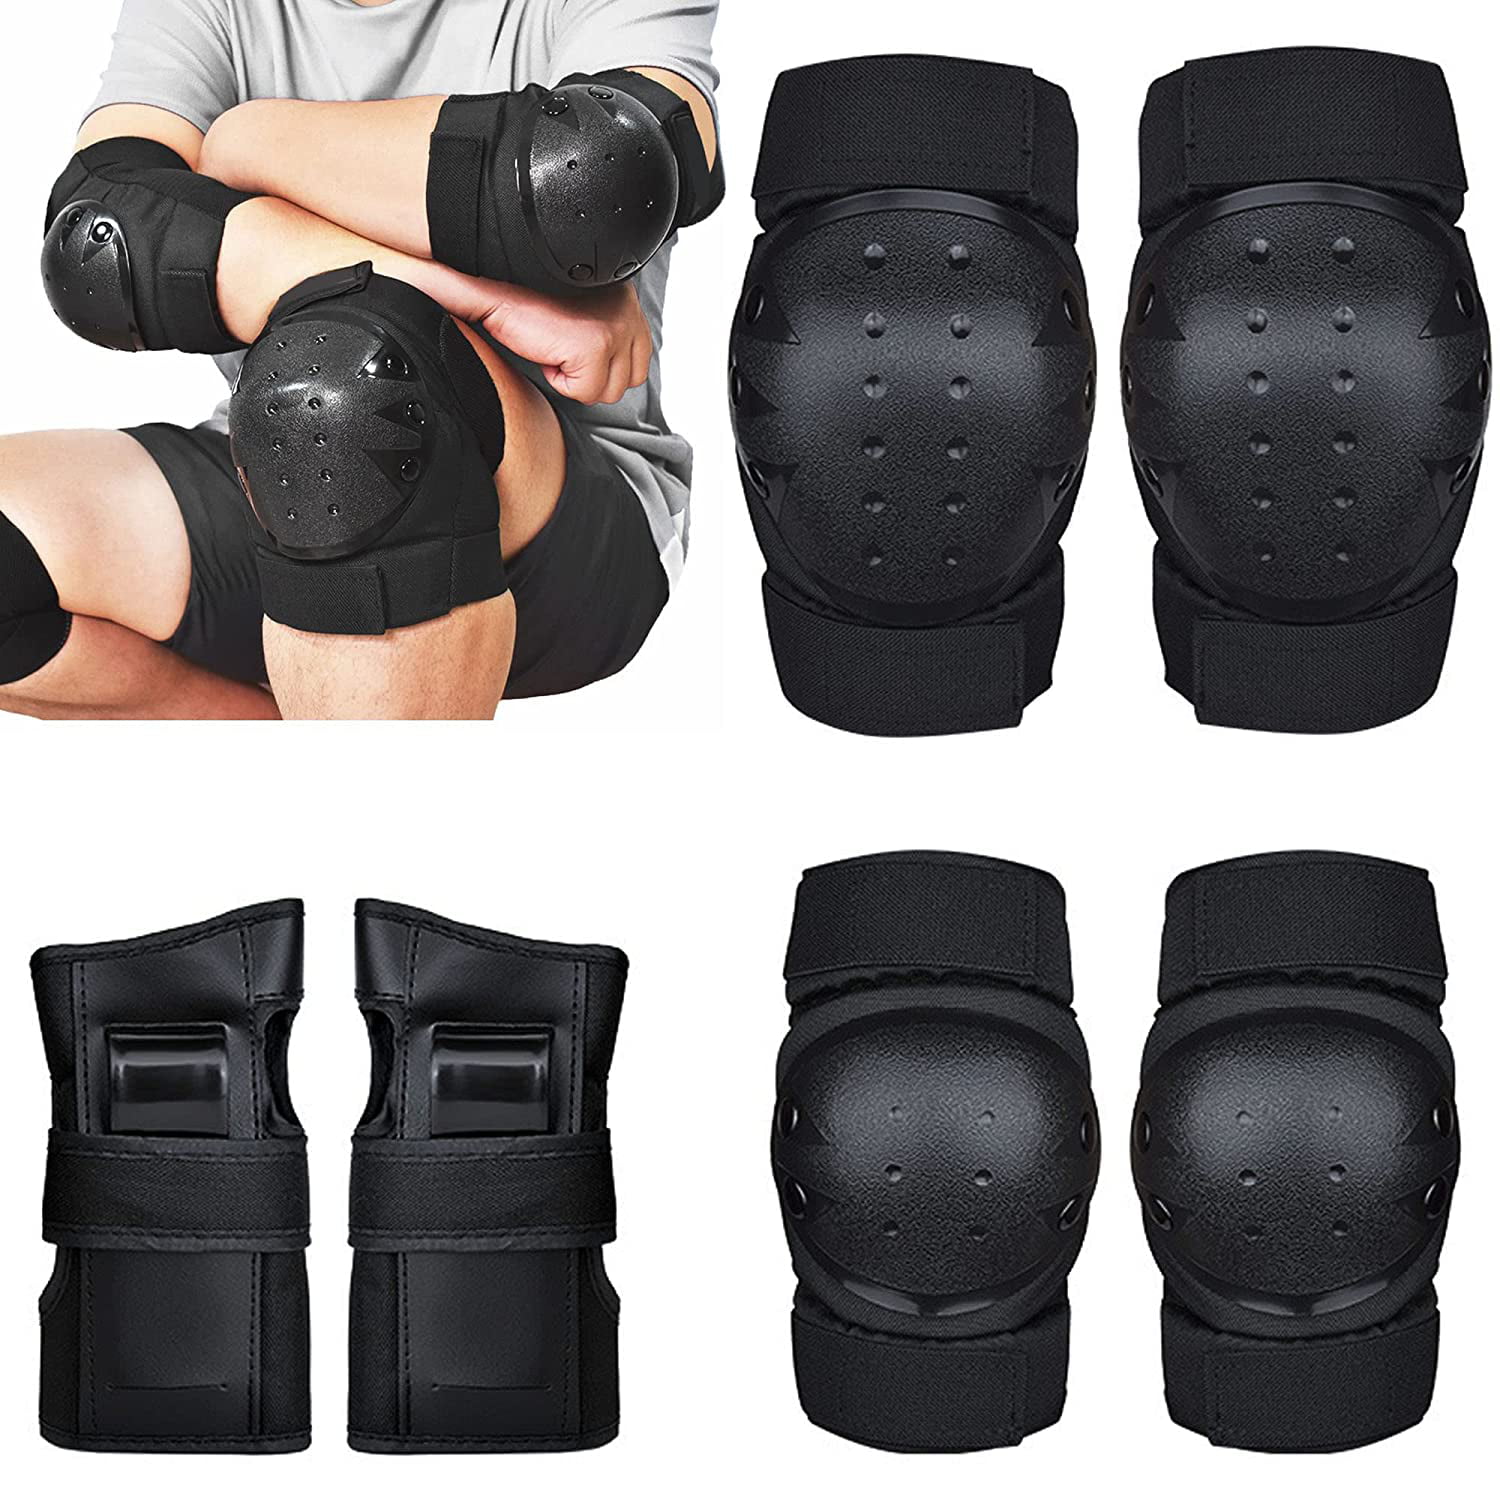 Skating Cycling Bike Adult Safety Guards Elbow Knee Pads Basketball Knee Black M 